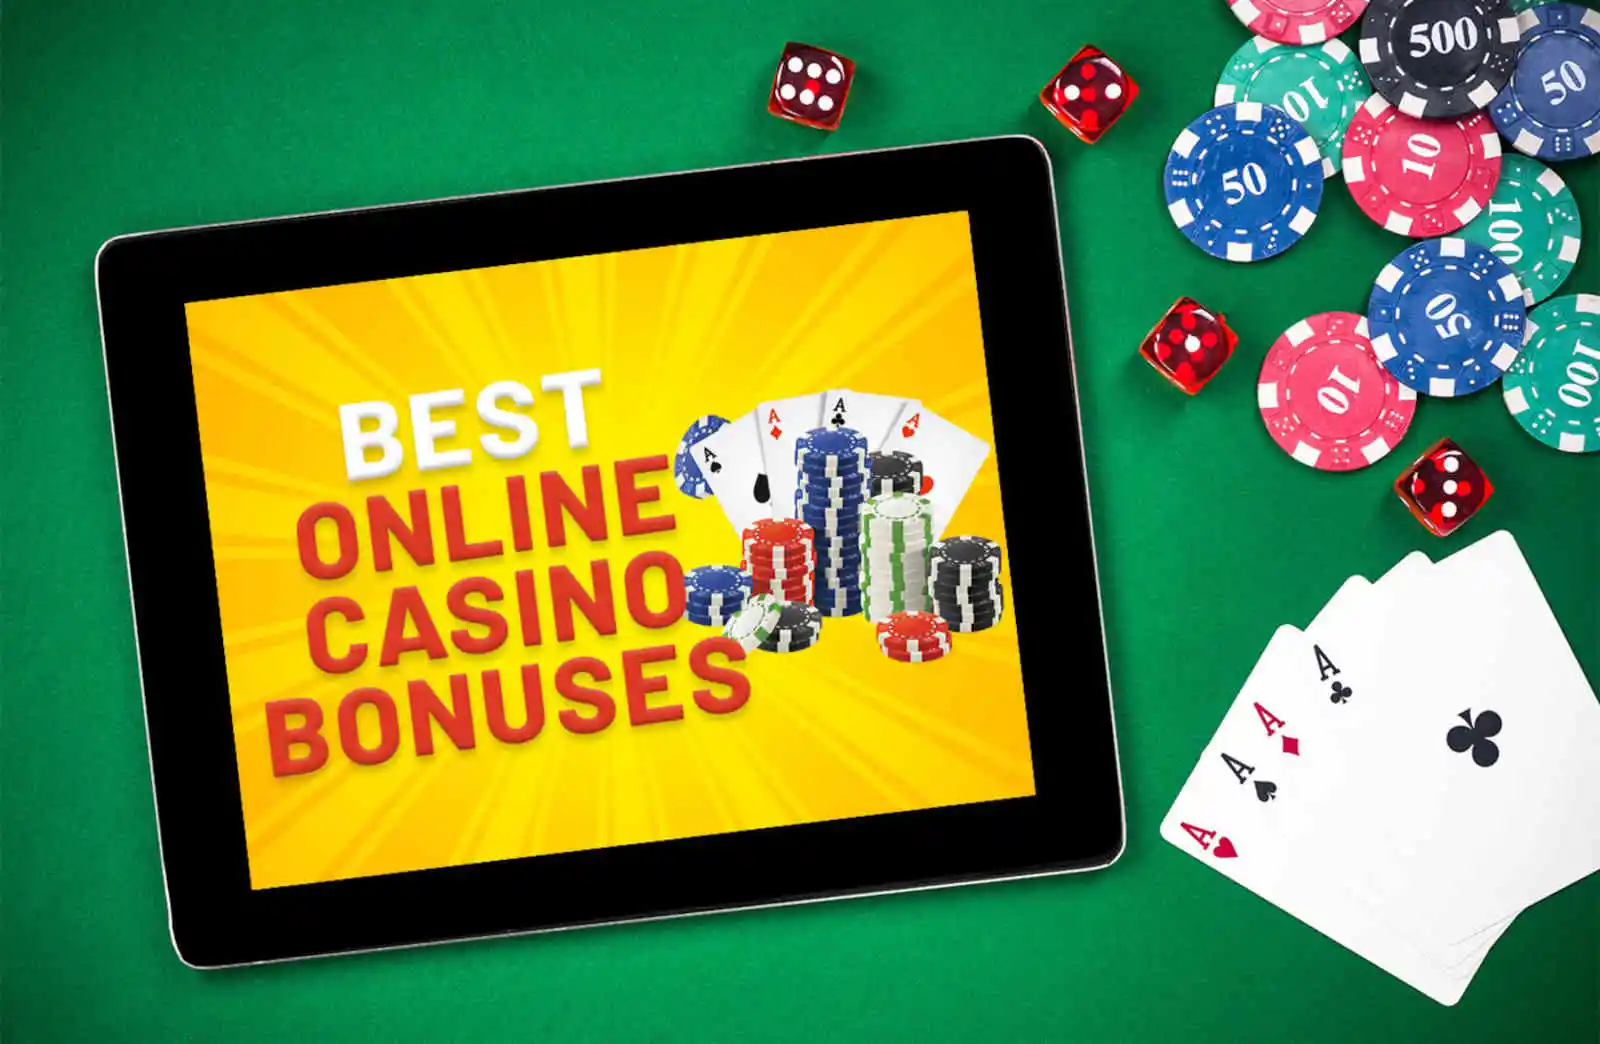 Online Casino Gambling Bonuses and How To Get Them